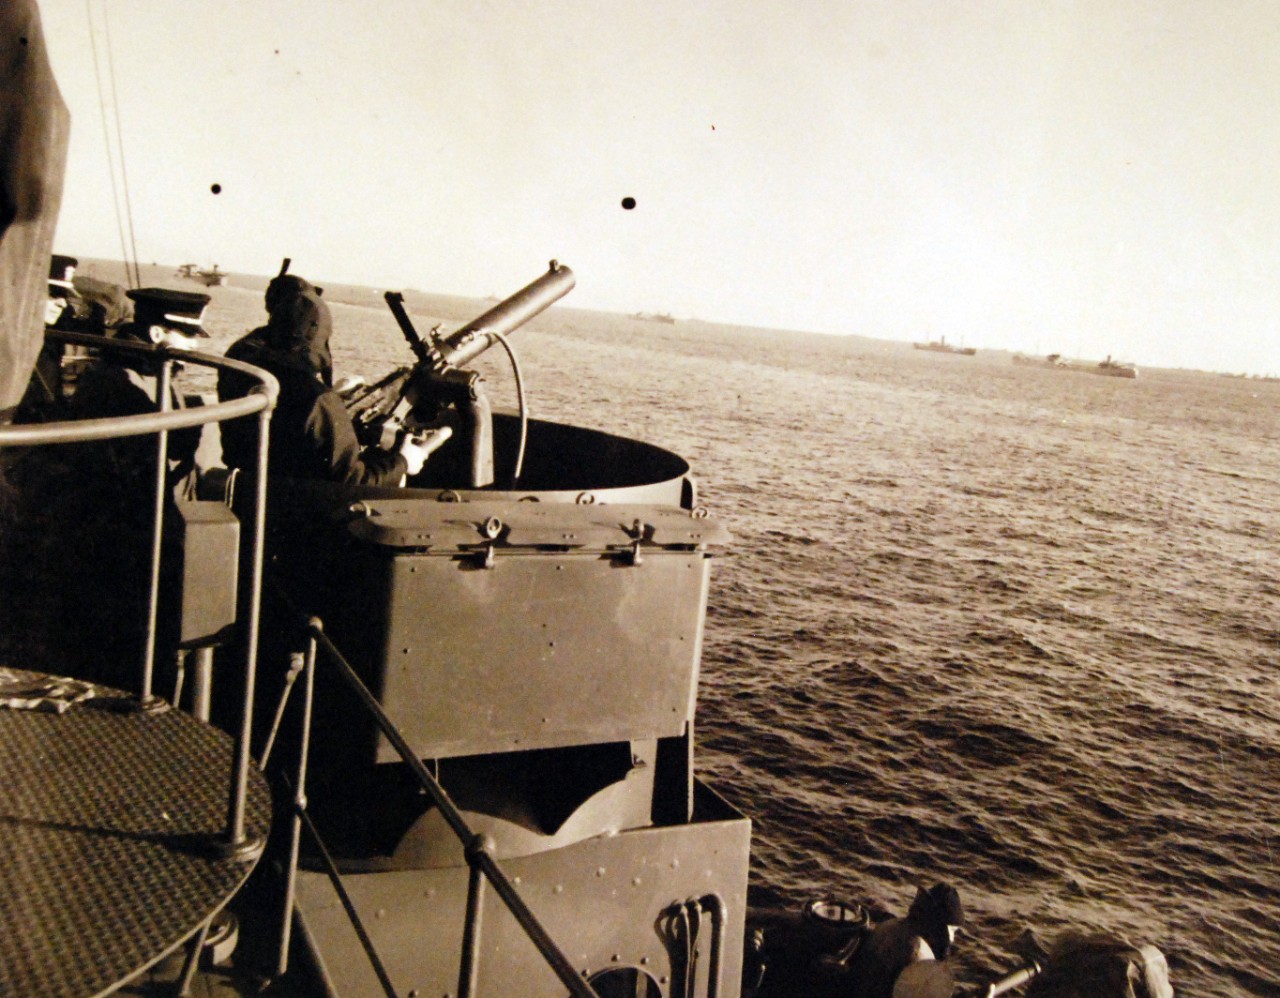 <p>80-G-405293: Merchant Ships: Naval Armed Guard. Crew man anti-aircraft guns as convoy reach dangerous waters. Note the ships of the convoy dotting the horizon, December 1941. Official U.S. Navy Photograph, now in the collections of the National Archives. (2015/9/9).</p>
